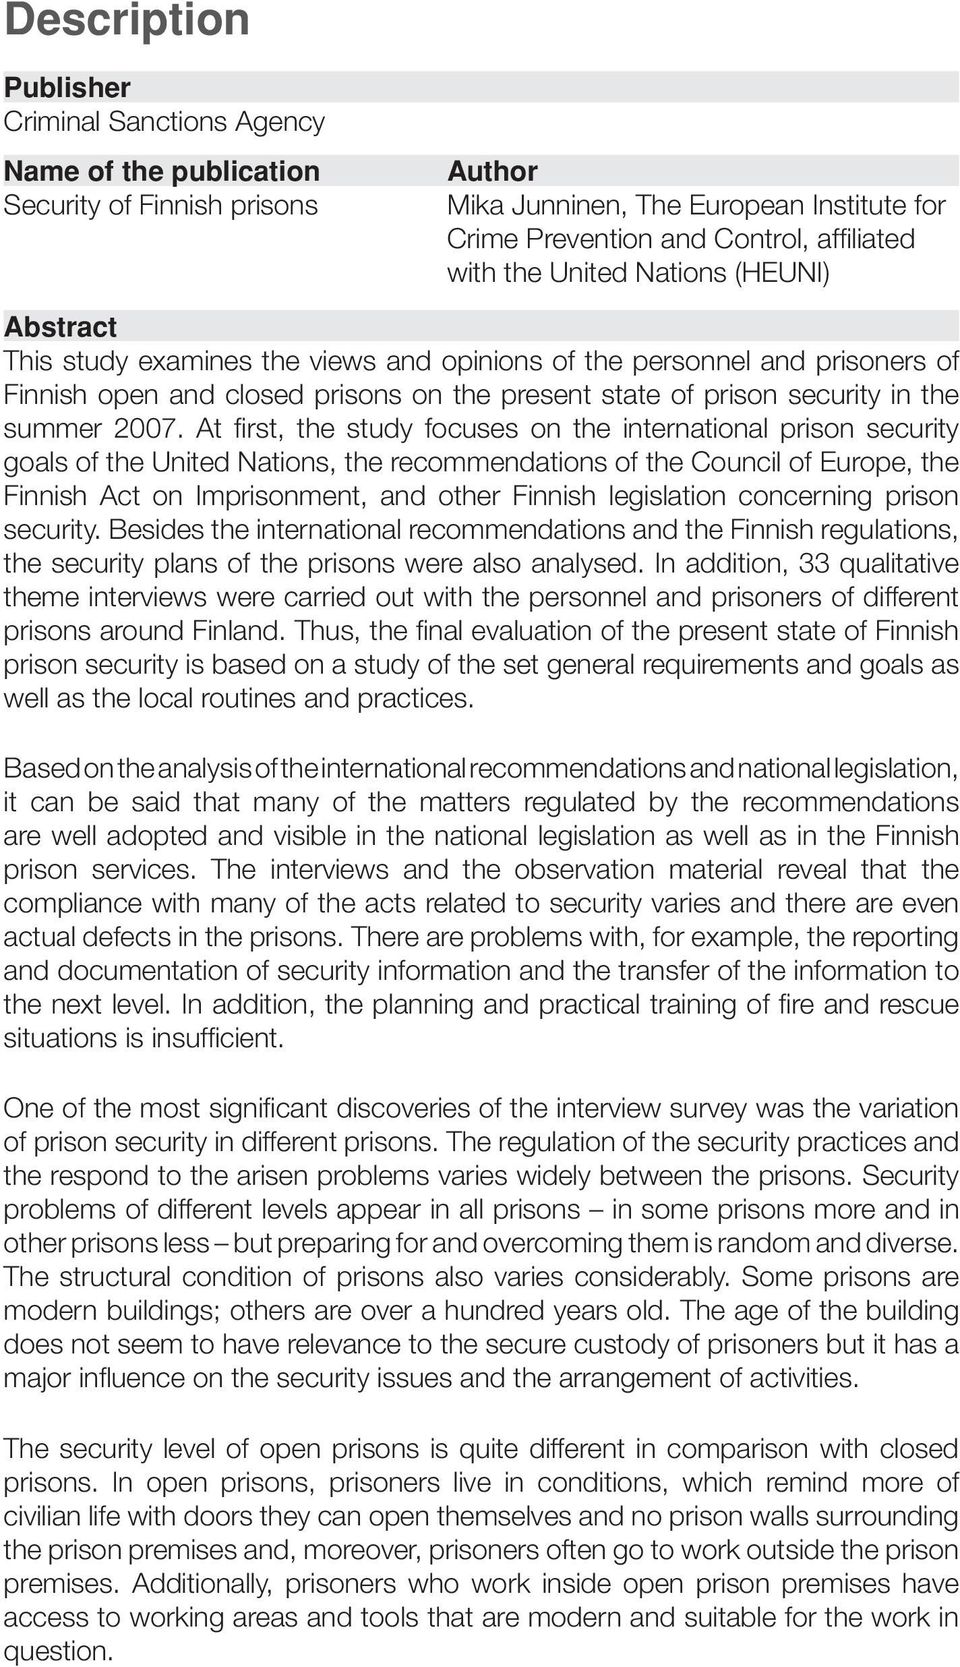 At first, the study focuses on the international prison security goals of the United Nations, the recommendations of the Council of Europe, the Finnish Act on Imprisonment, and other Finnish